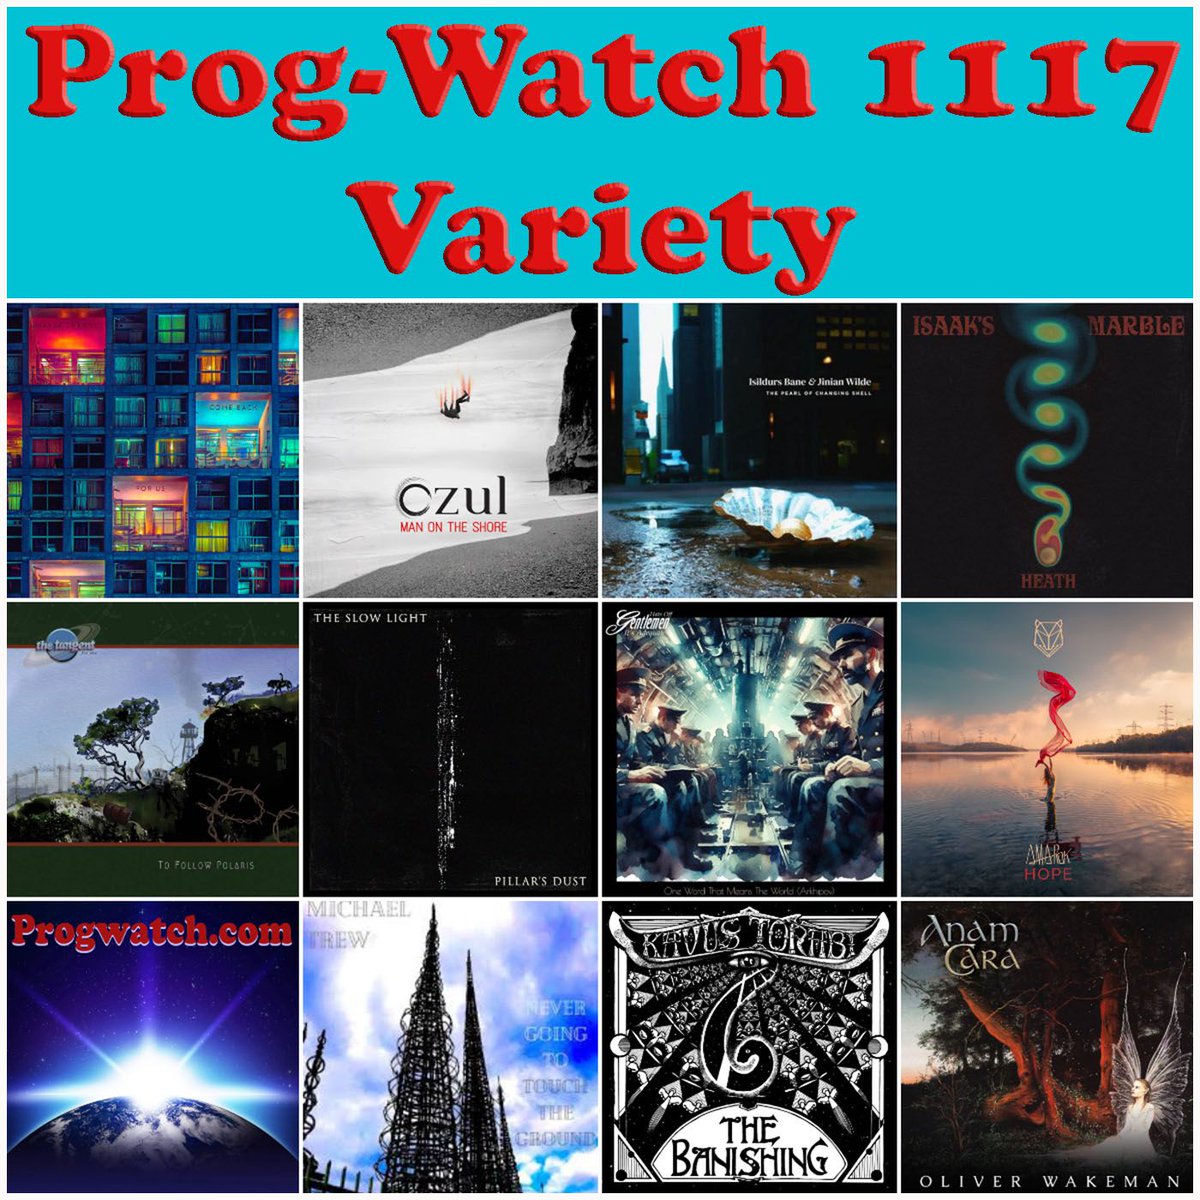 Great new #progrock on this week's show, from Heath, Kavus Torabi, Isildur's Bane with Jinian Wilde, The Tangent, Michael Trew, Amarok, The Slow Light, The Dave Foster Band, Hats Off Gentlemen, It's Adequate, Ozul, and Oliver Wakeman! progwatch.com/1117/